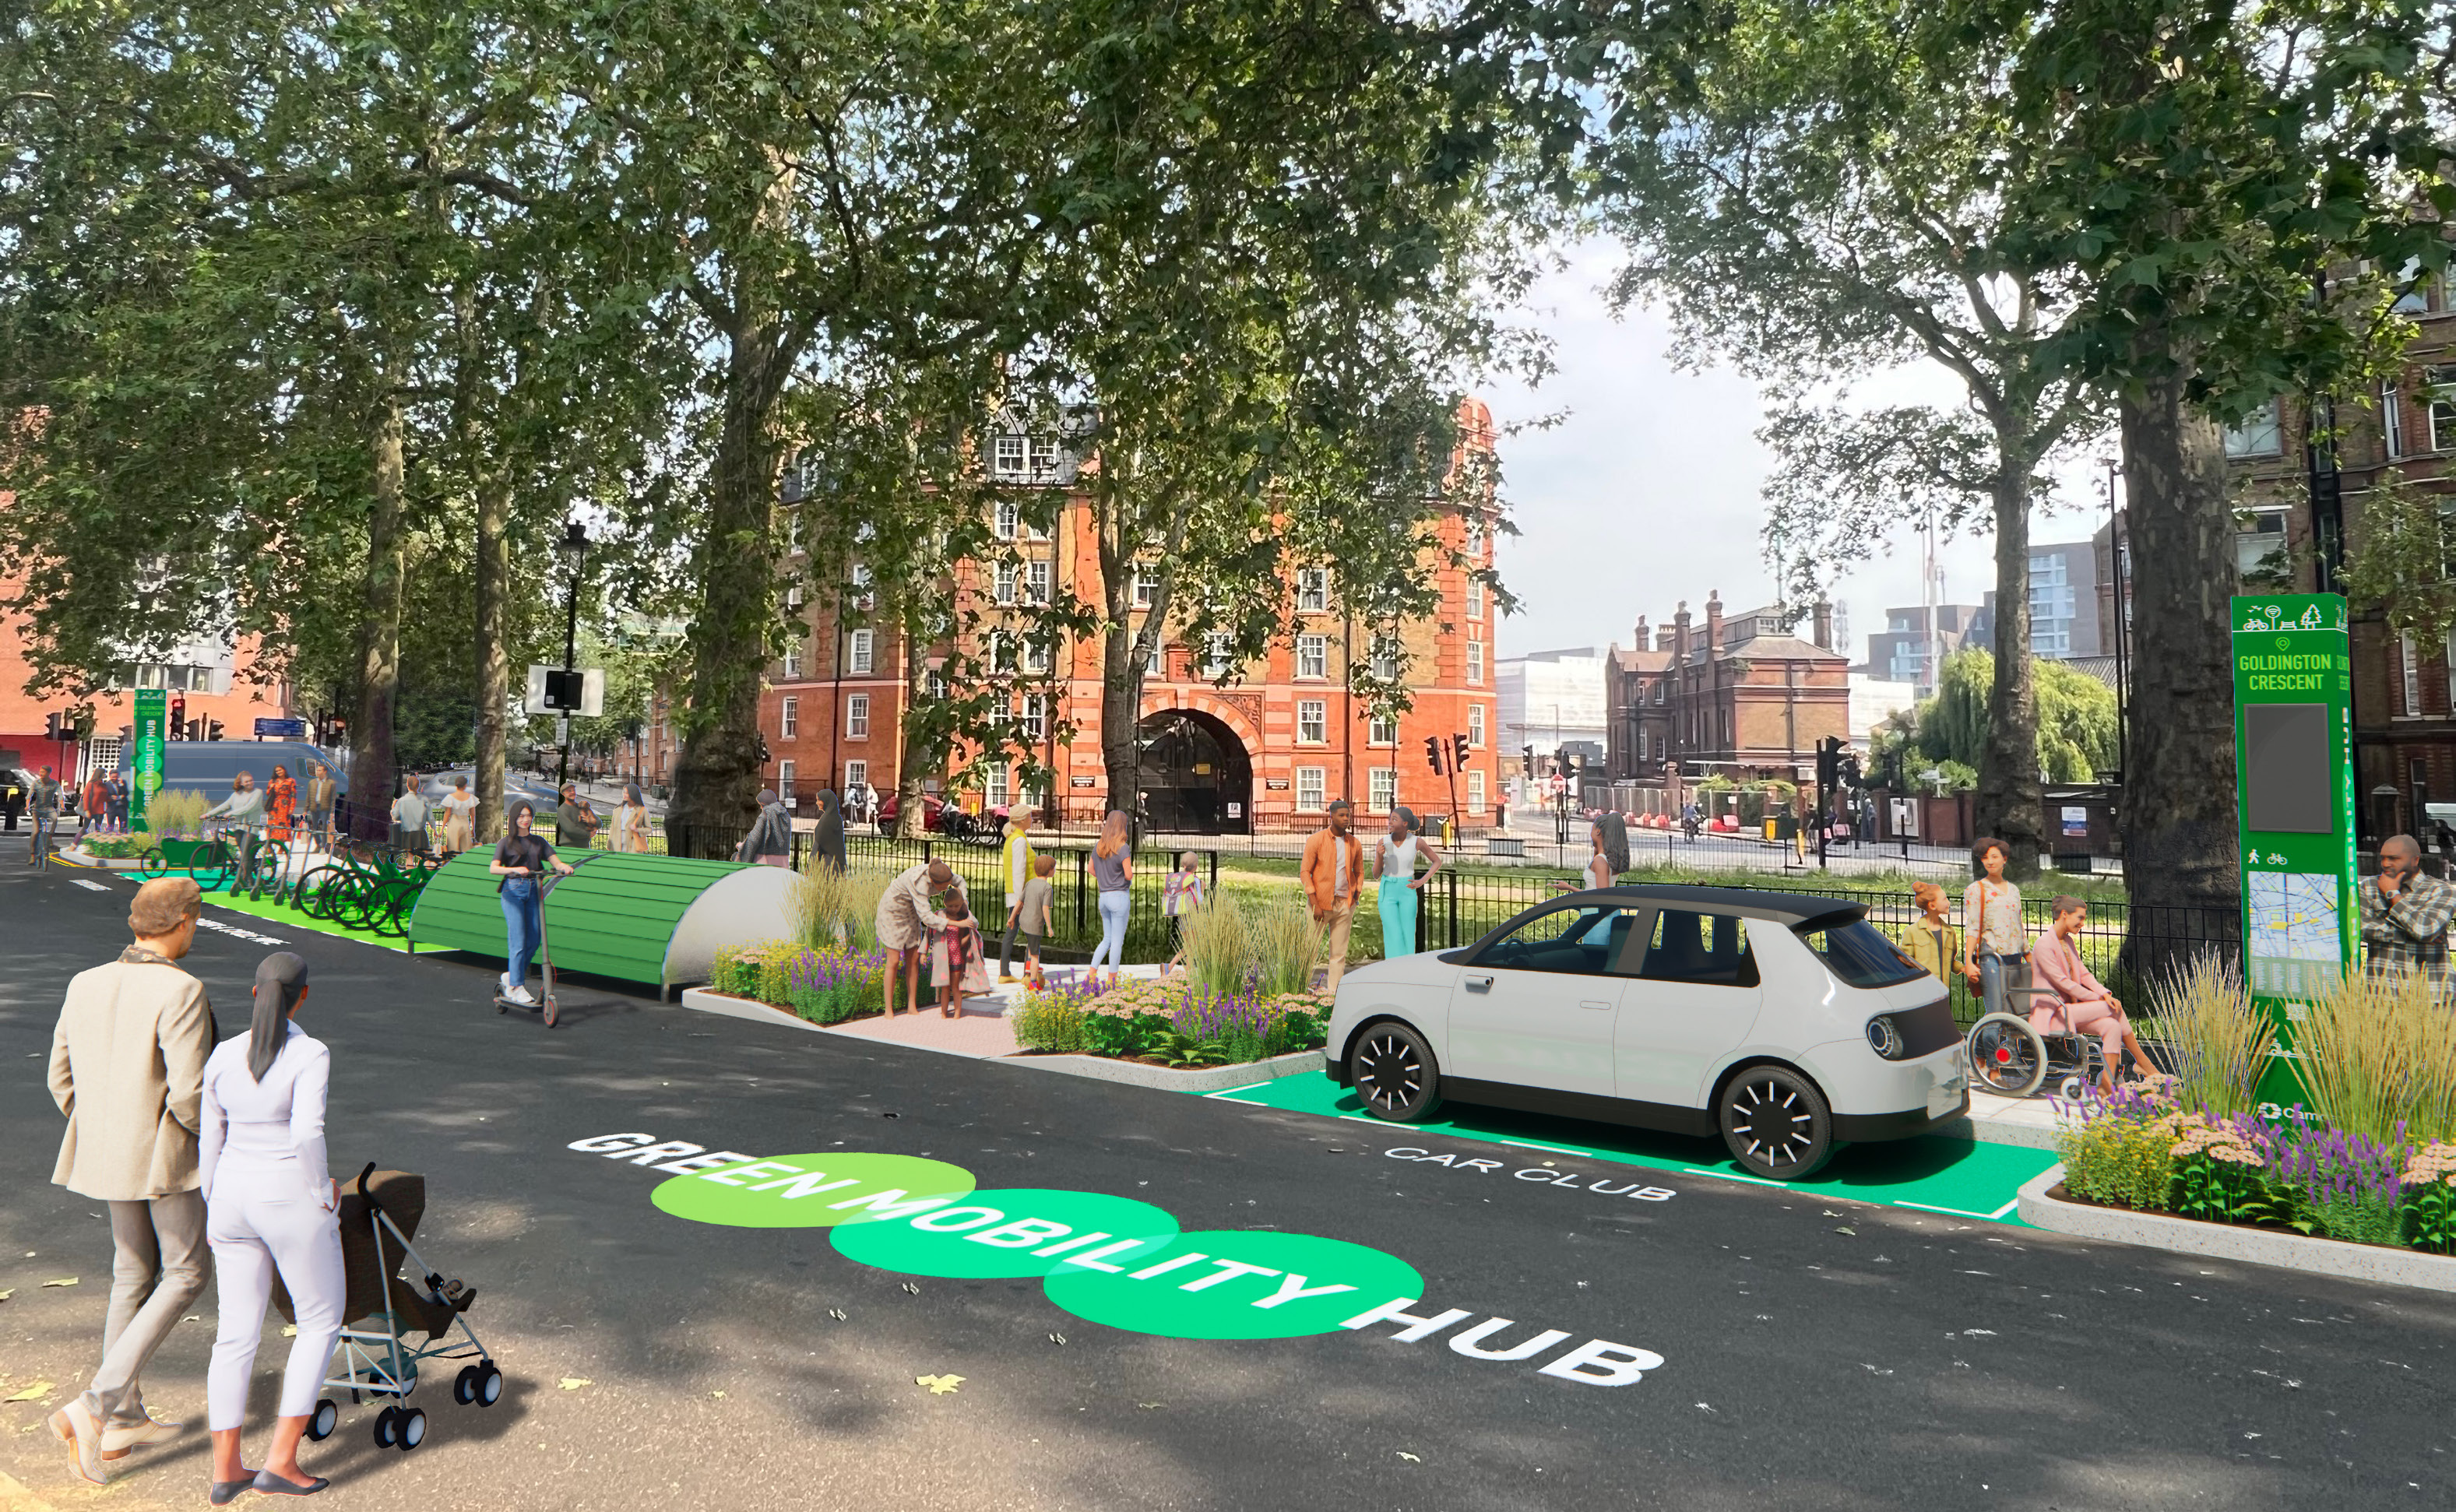 visualisation of a green mobilty hub with bike parking, hire bikes, plants, a car club bay and direction information